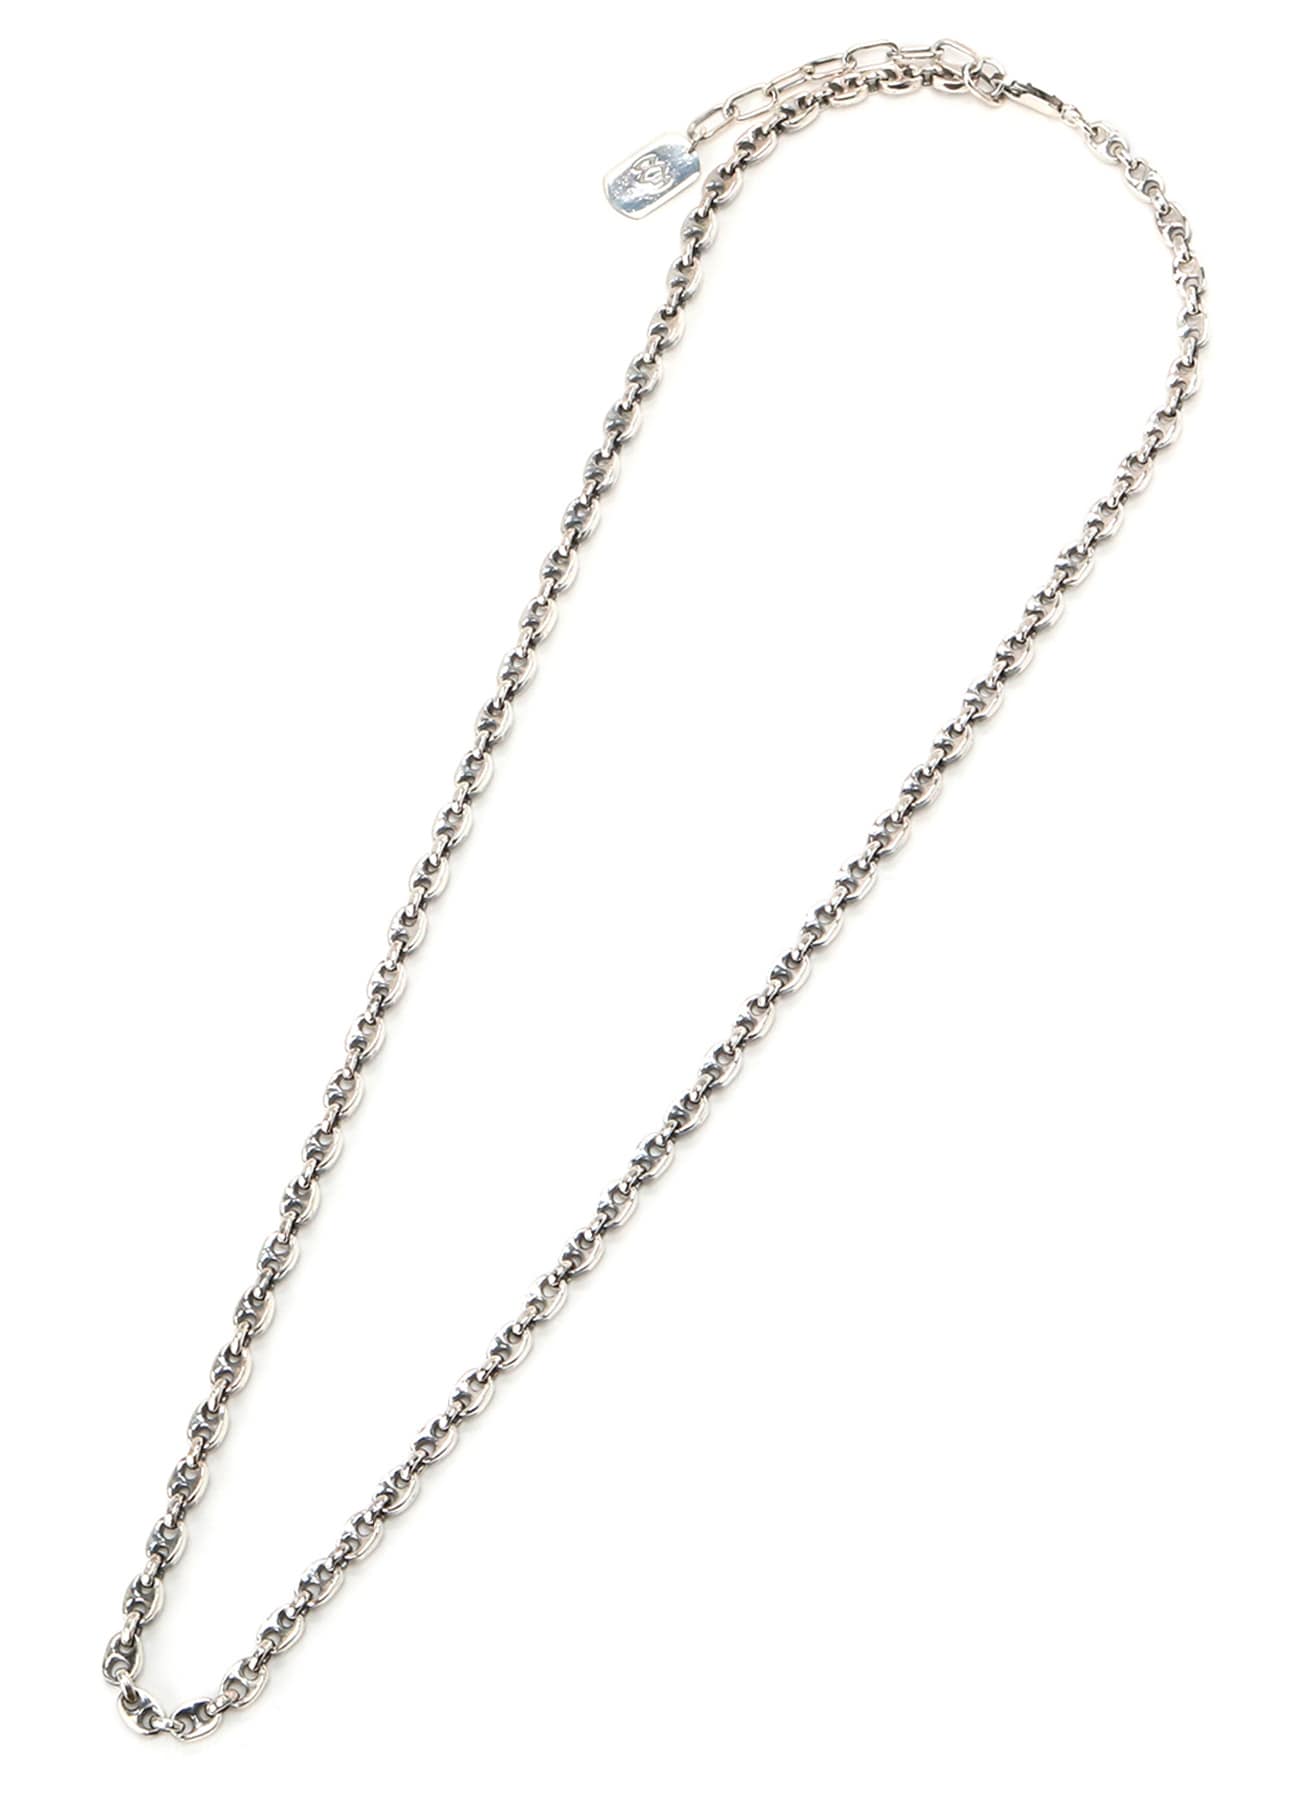 SILVER 950 CHAIN NECKLACE PT1